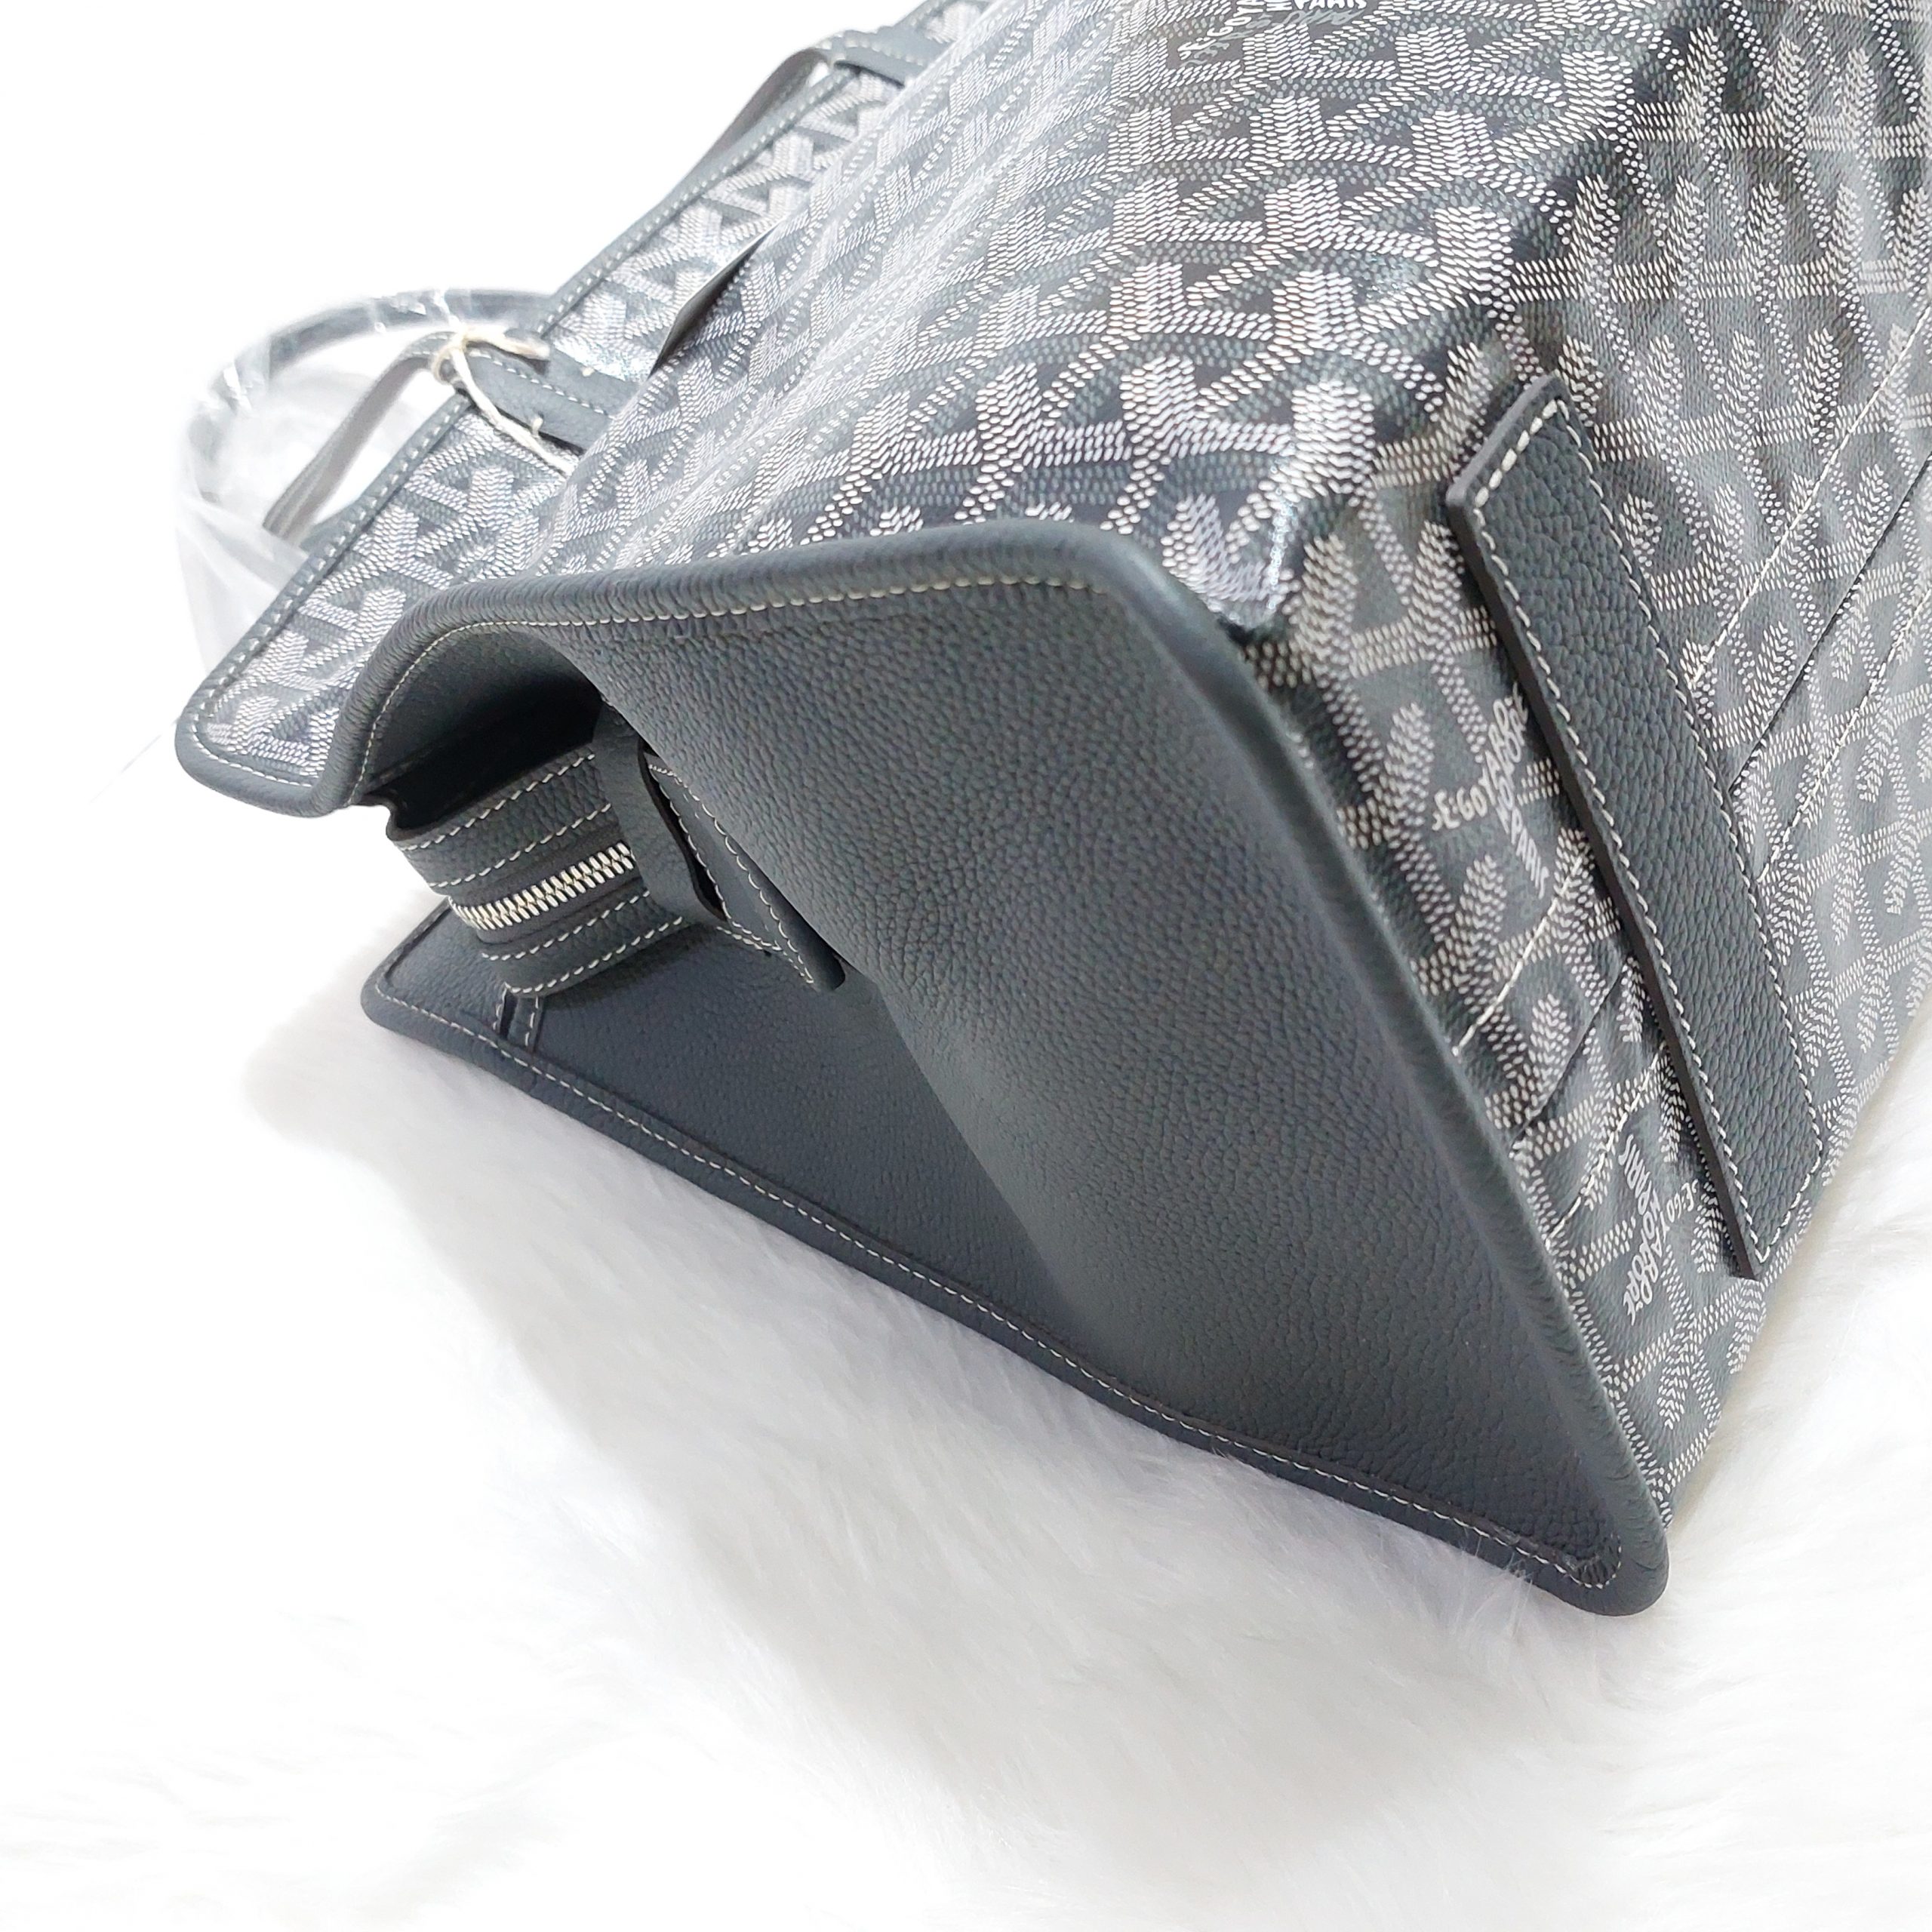 Brand New Goyard Grey Sac Hardy PM Dog Carrier Pet Bag with Pouch